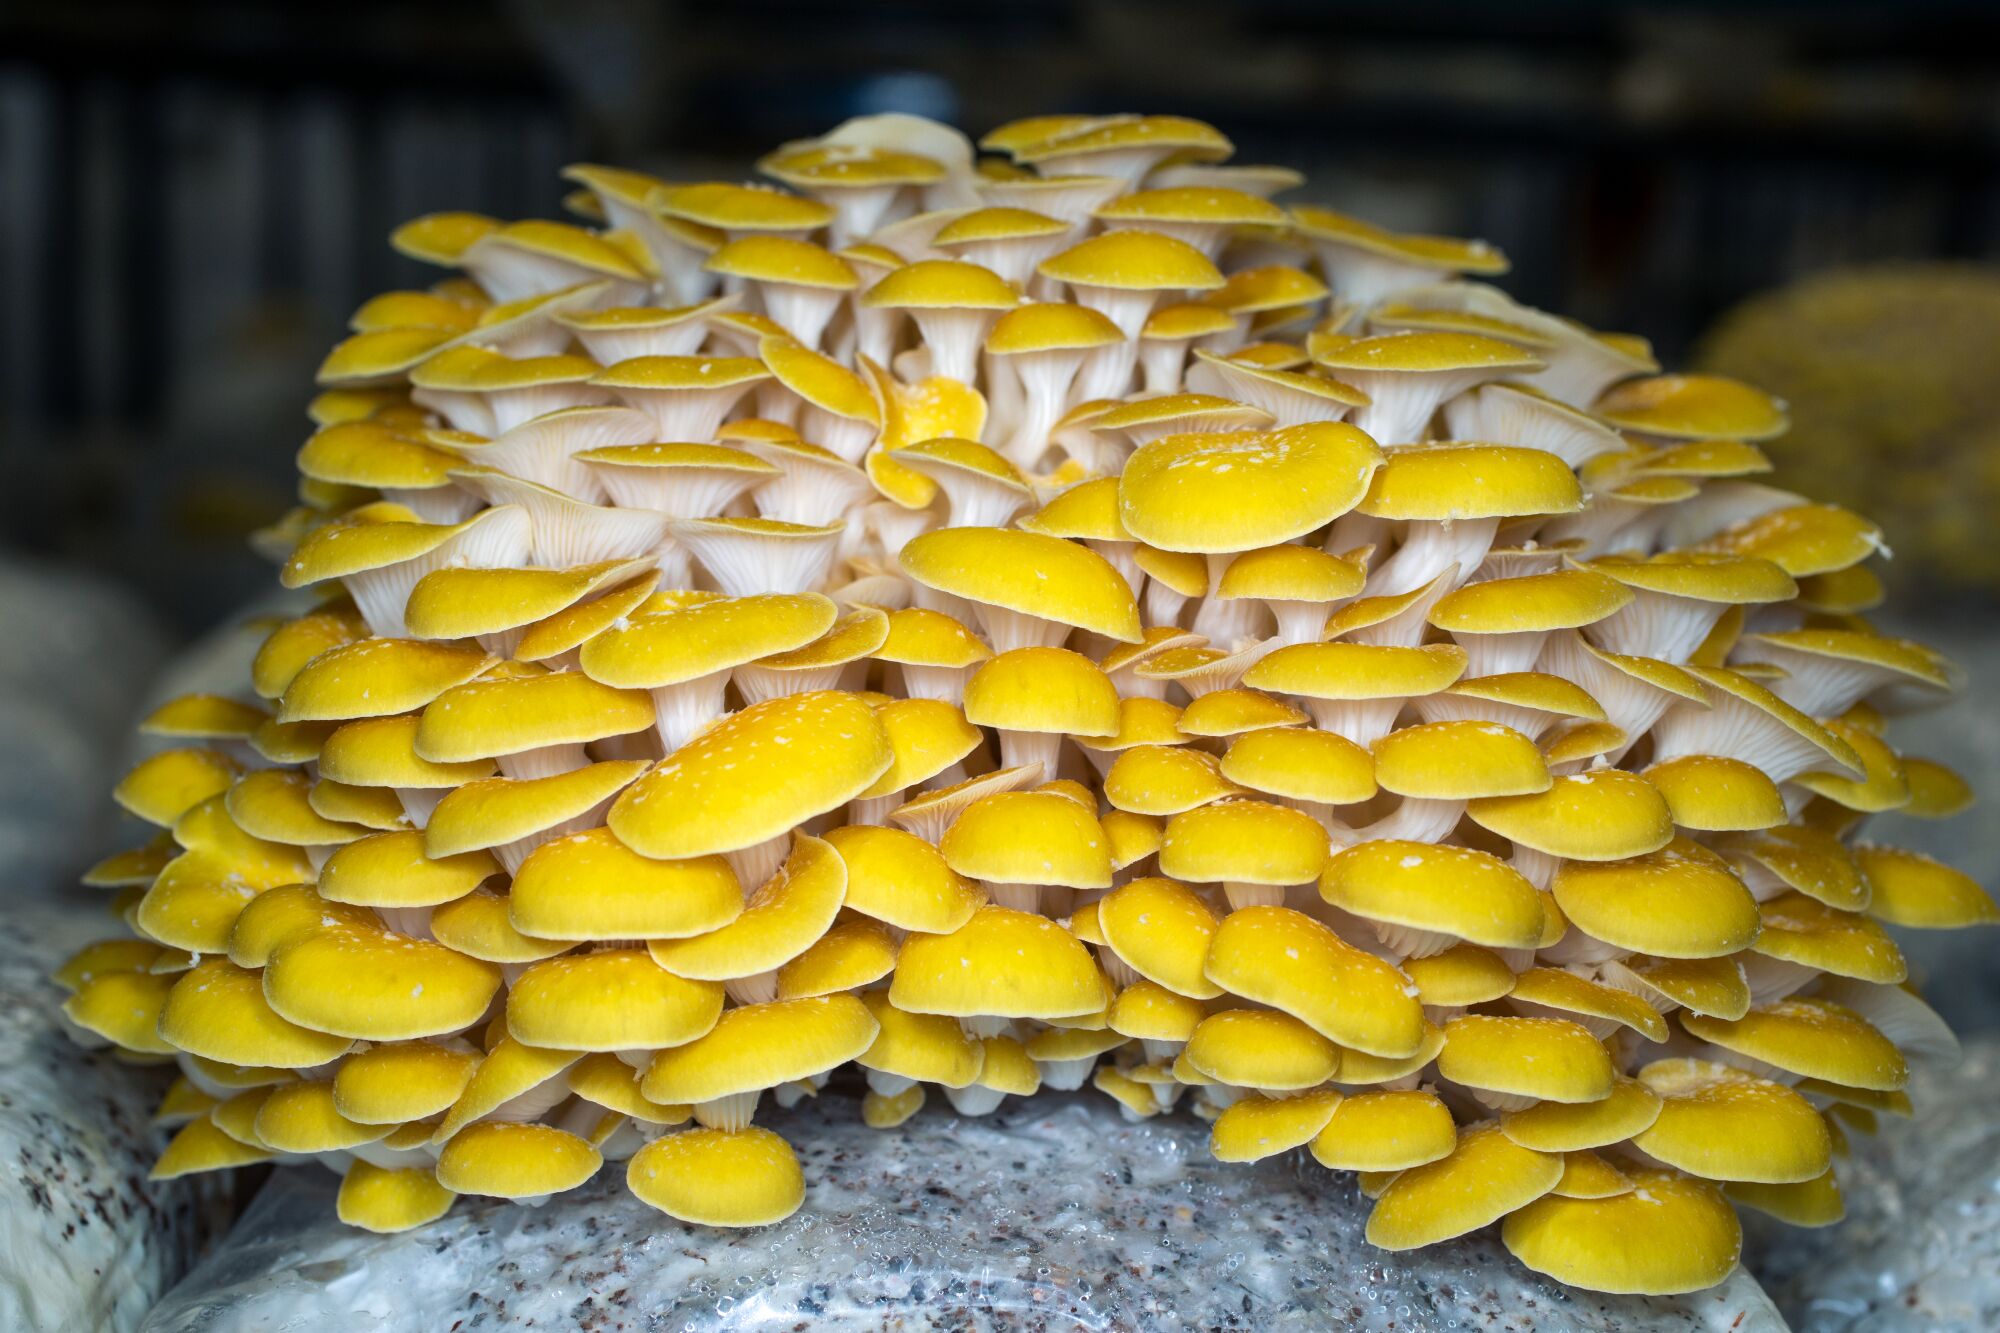 A bunch of yellow oyster mushrooms growing at an urban farm.